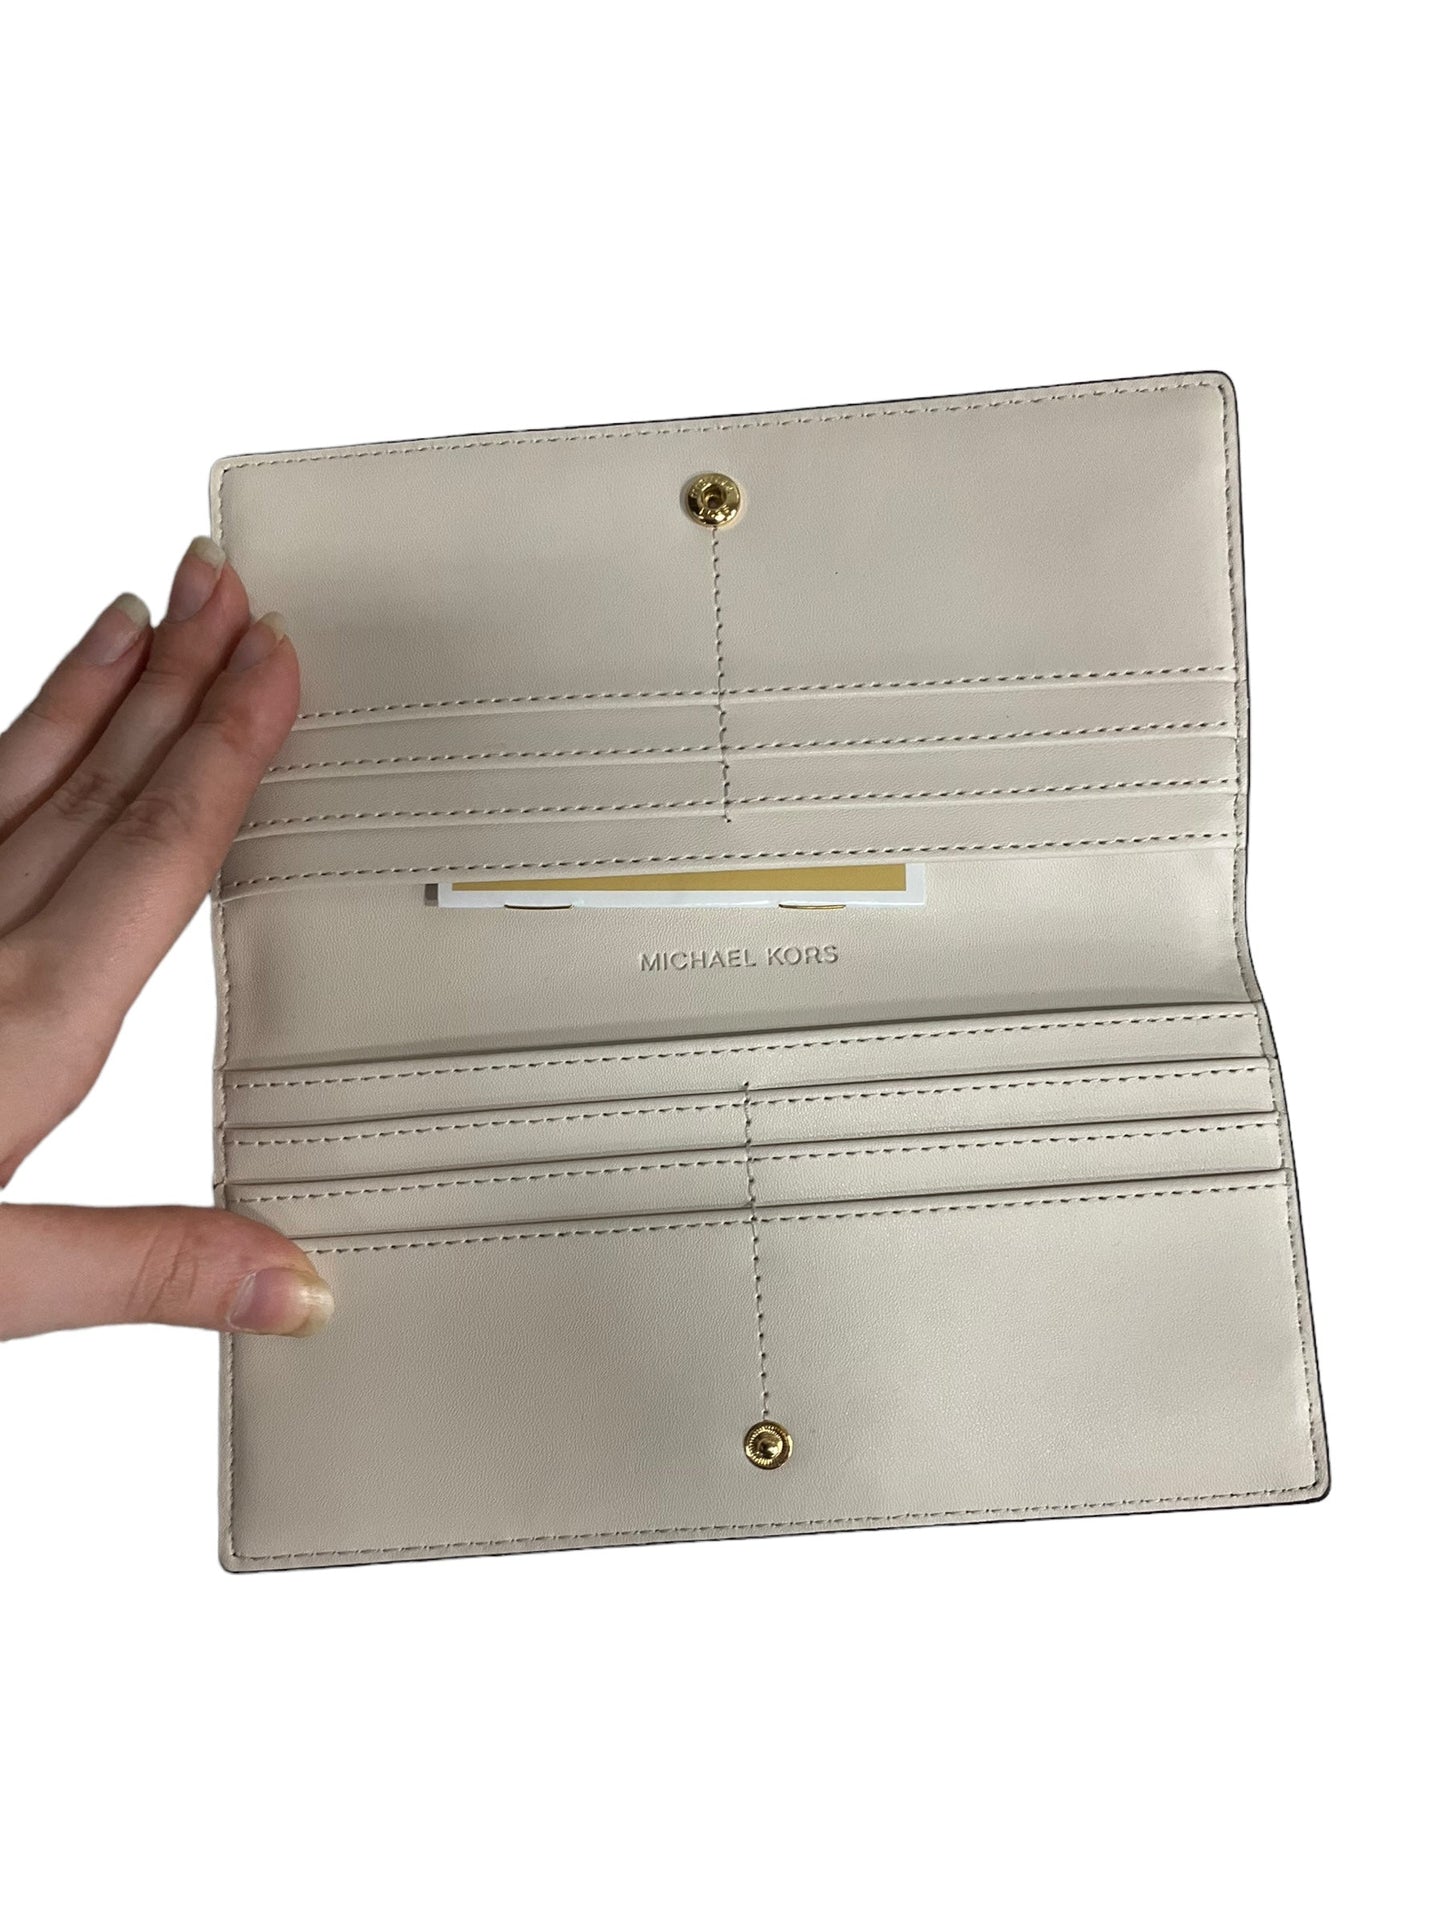 Wallet Leather By Michael Kors  Size: Medium